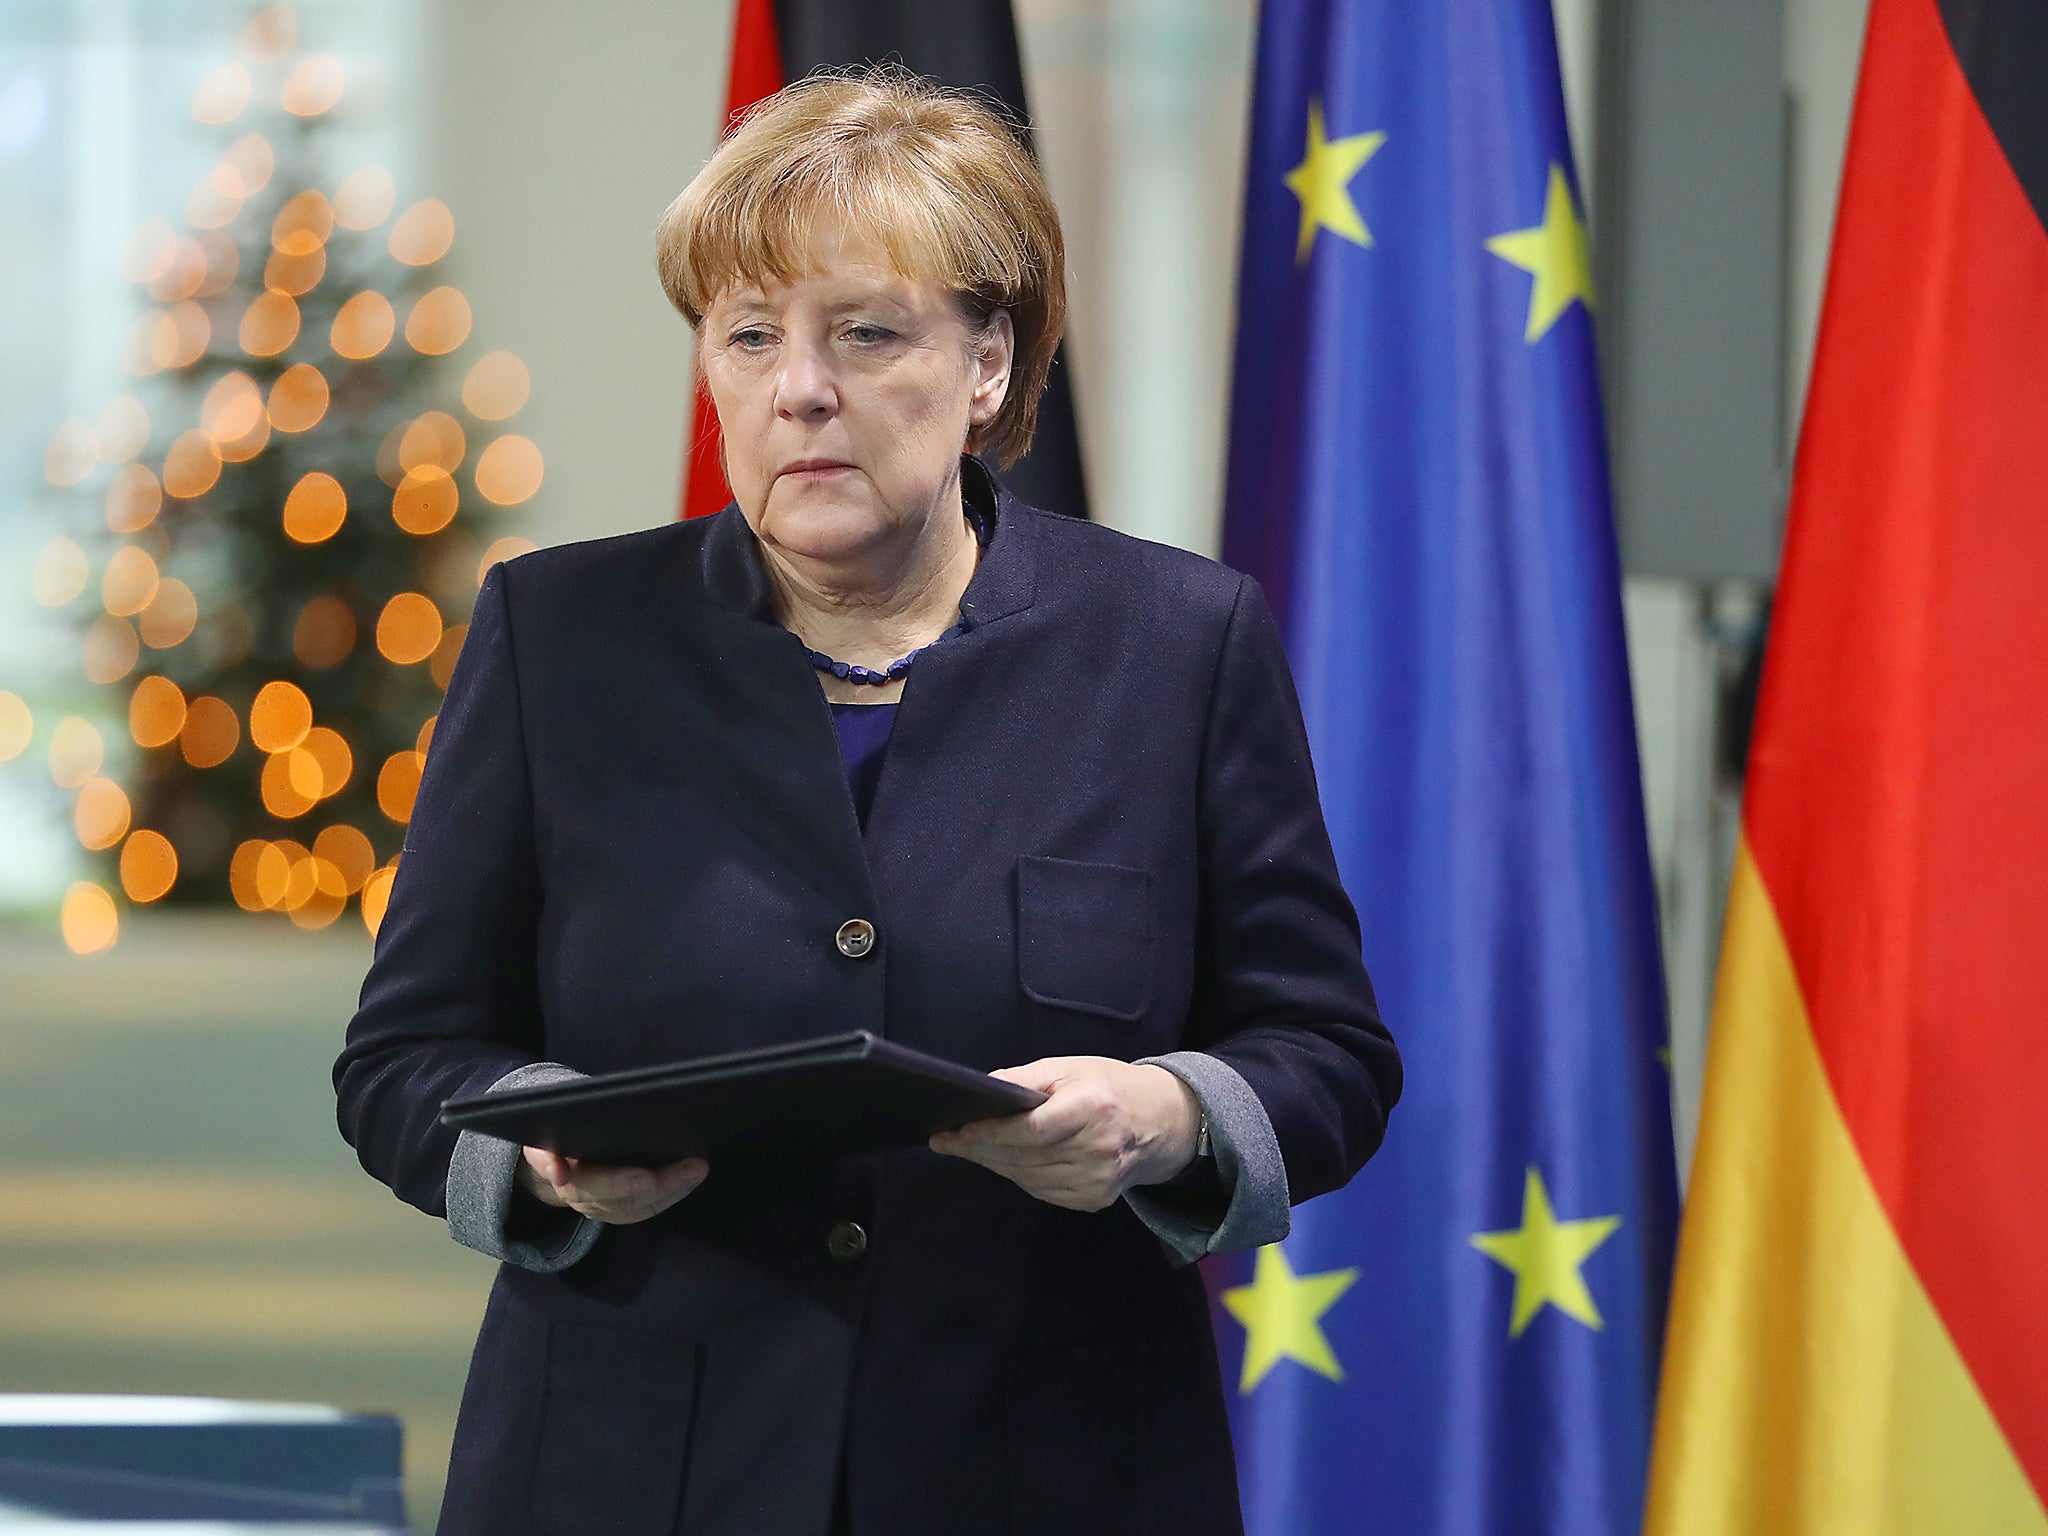 Angela Merkel is due to meet with German ministers tomorrow to discuss Germany’s position on Brexit